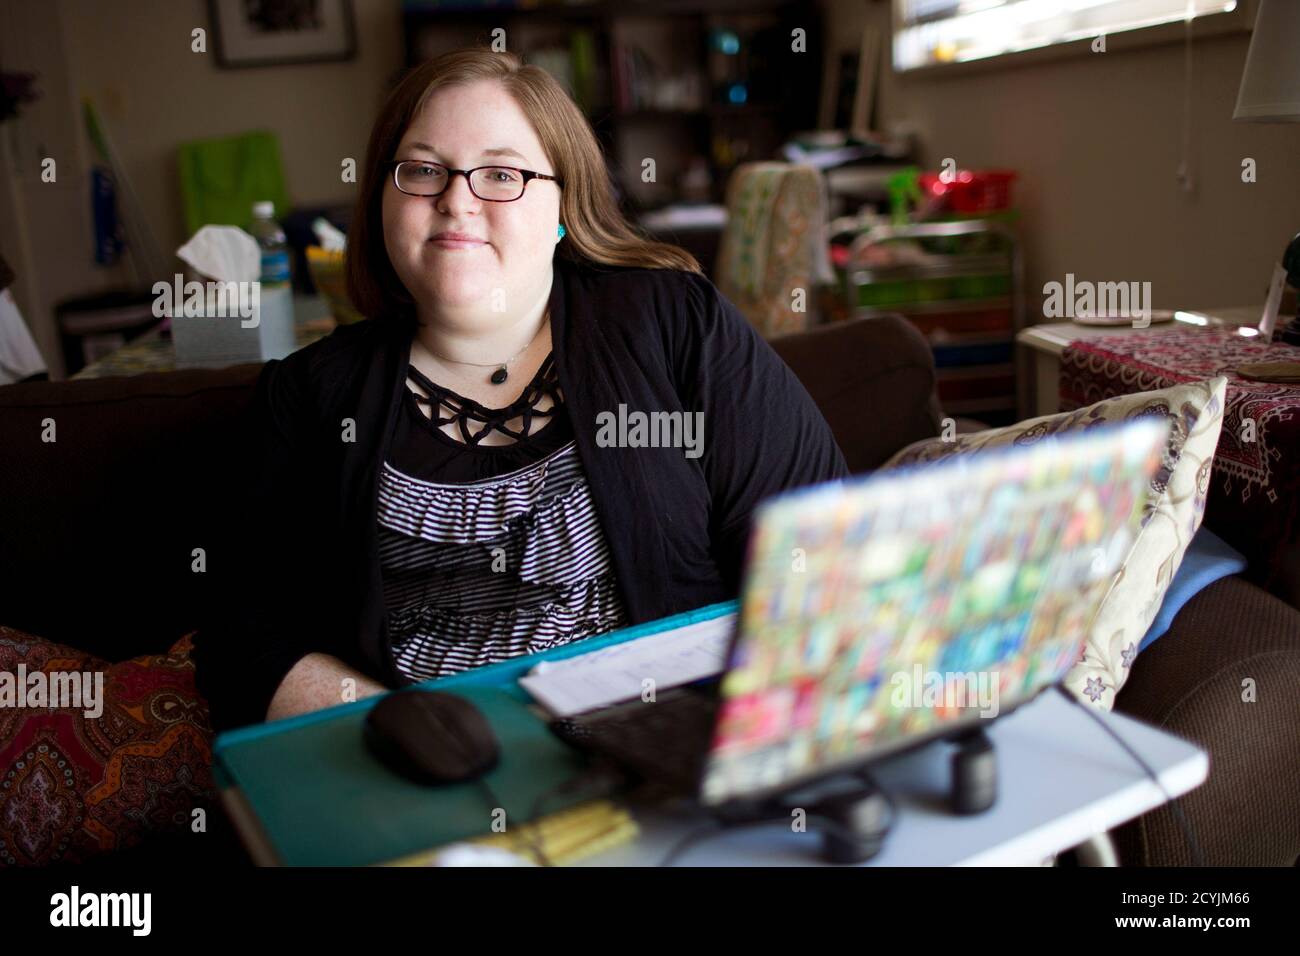 Cassandra Bales, who is looking to sign up for Obamacare, poses for a portrait in her home in Suitland, Maryland, on October 15, 2013. Uninsured Americans are showing more interest in the coverage offered under President Barack Obama's healthcare law despite technical problems that have hindered enrollment through a government website, according to a Reuters/Ipsos poll. Picture taken October 15, 2013. REUTERS/Joshua Roberts    (UNITED STATES - Tags: POLITICS HEALTH PORTRAIT) Stock Photo